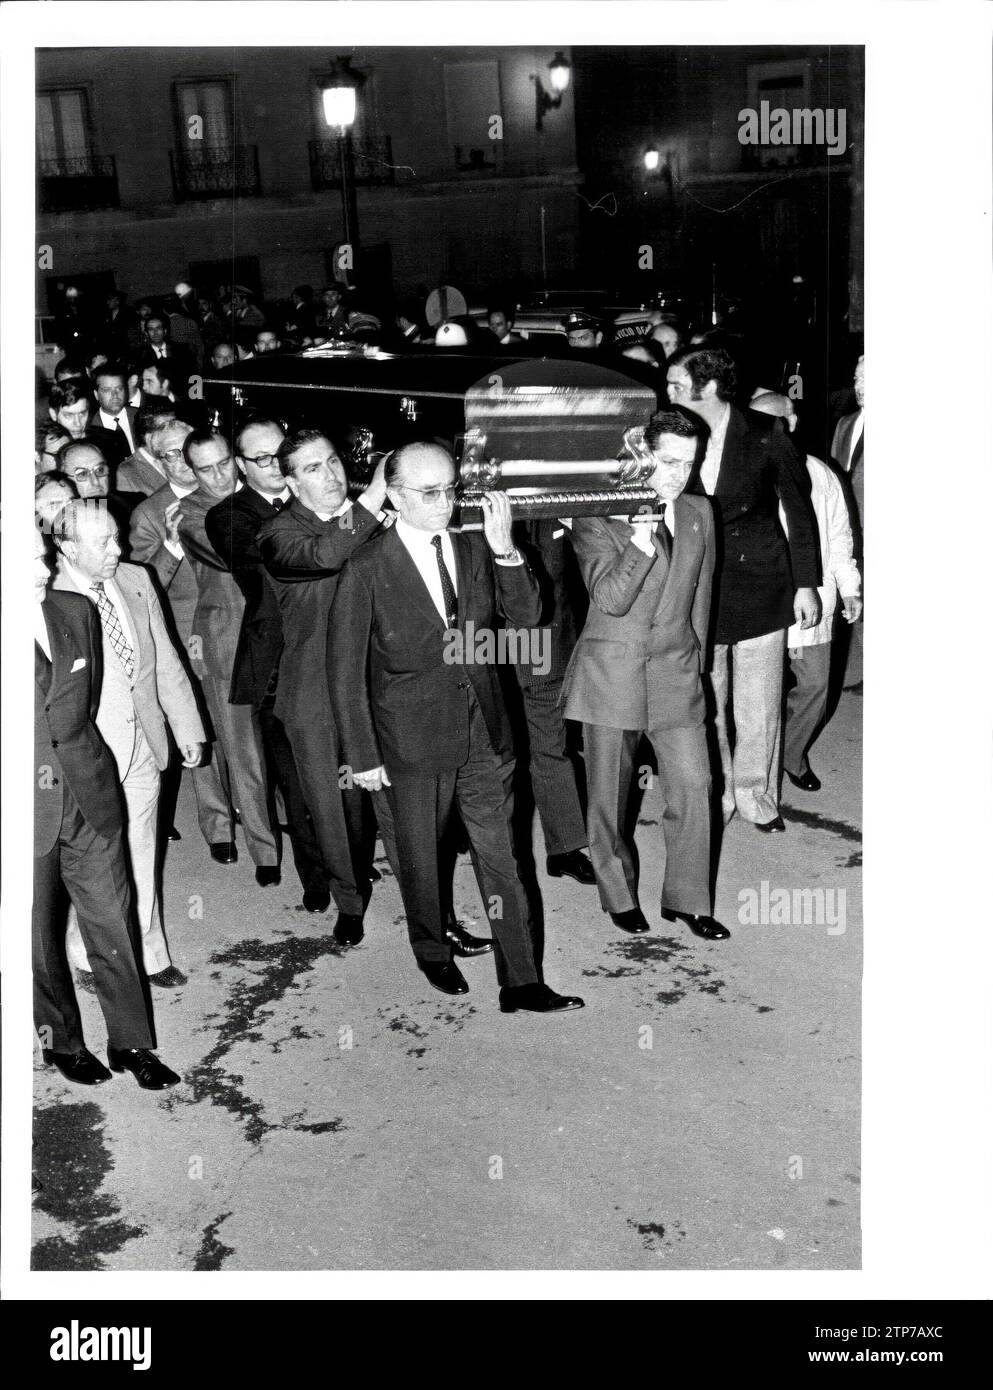 06/12/1975. The Mortal Remains of Mr. Fernando blacksmith weaver arrive at dawn at the headquarters of the national council of the Movie, where the Burning Carpilla would be installed. Among the Protadores, Aadolfo Suárez. Credit: Album / Archivo ABC / Luis Alonso Stock Photo